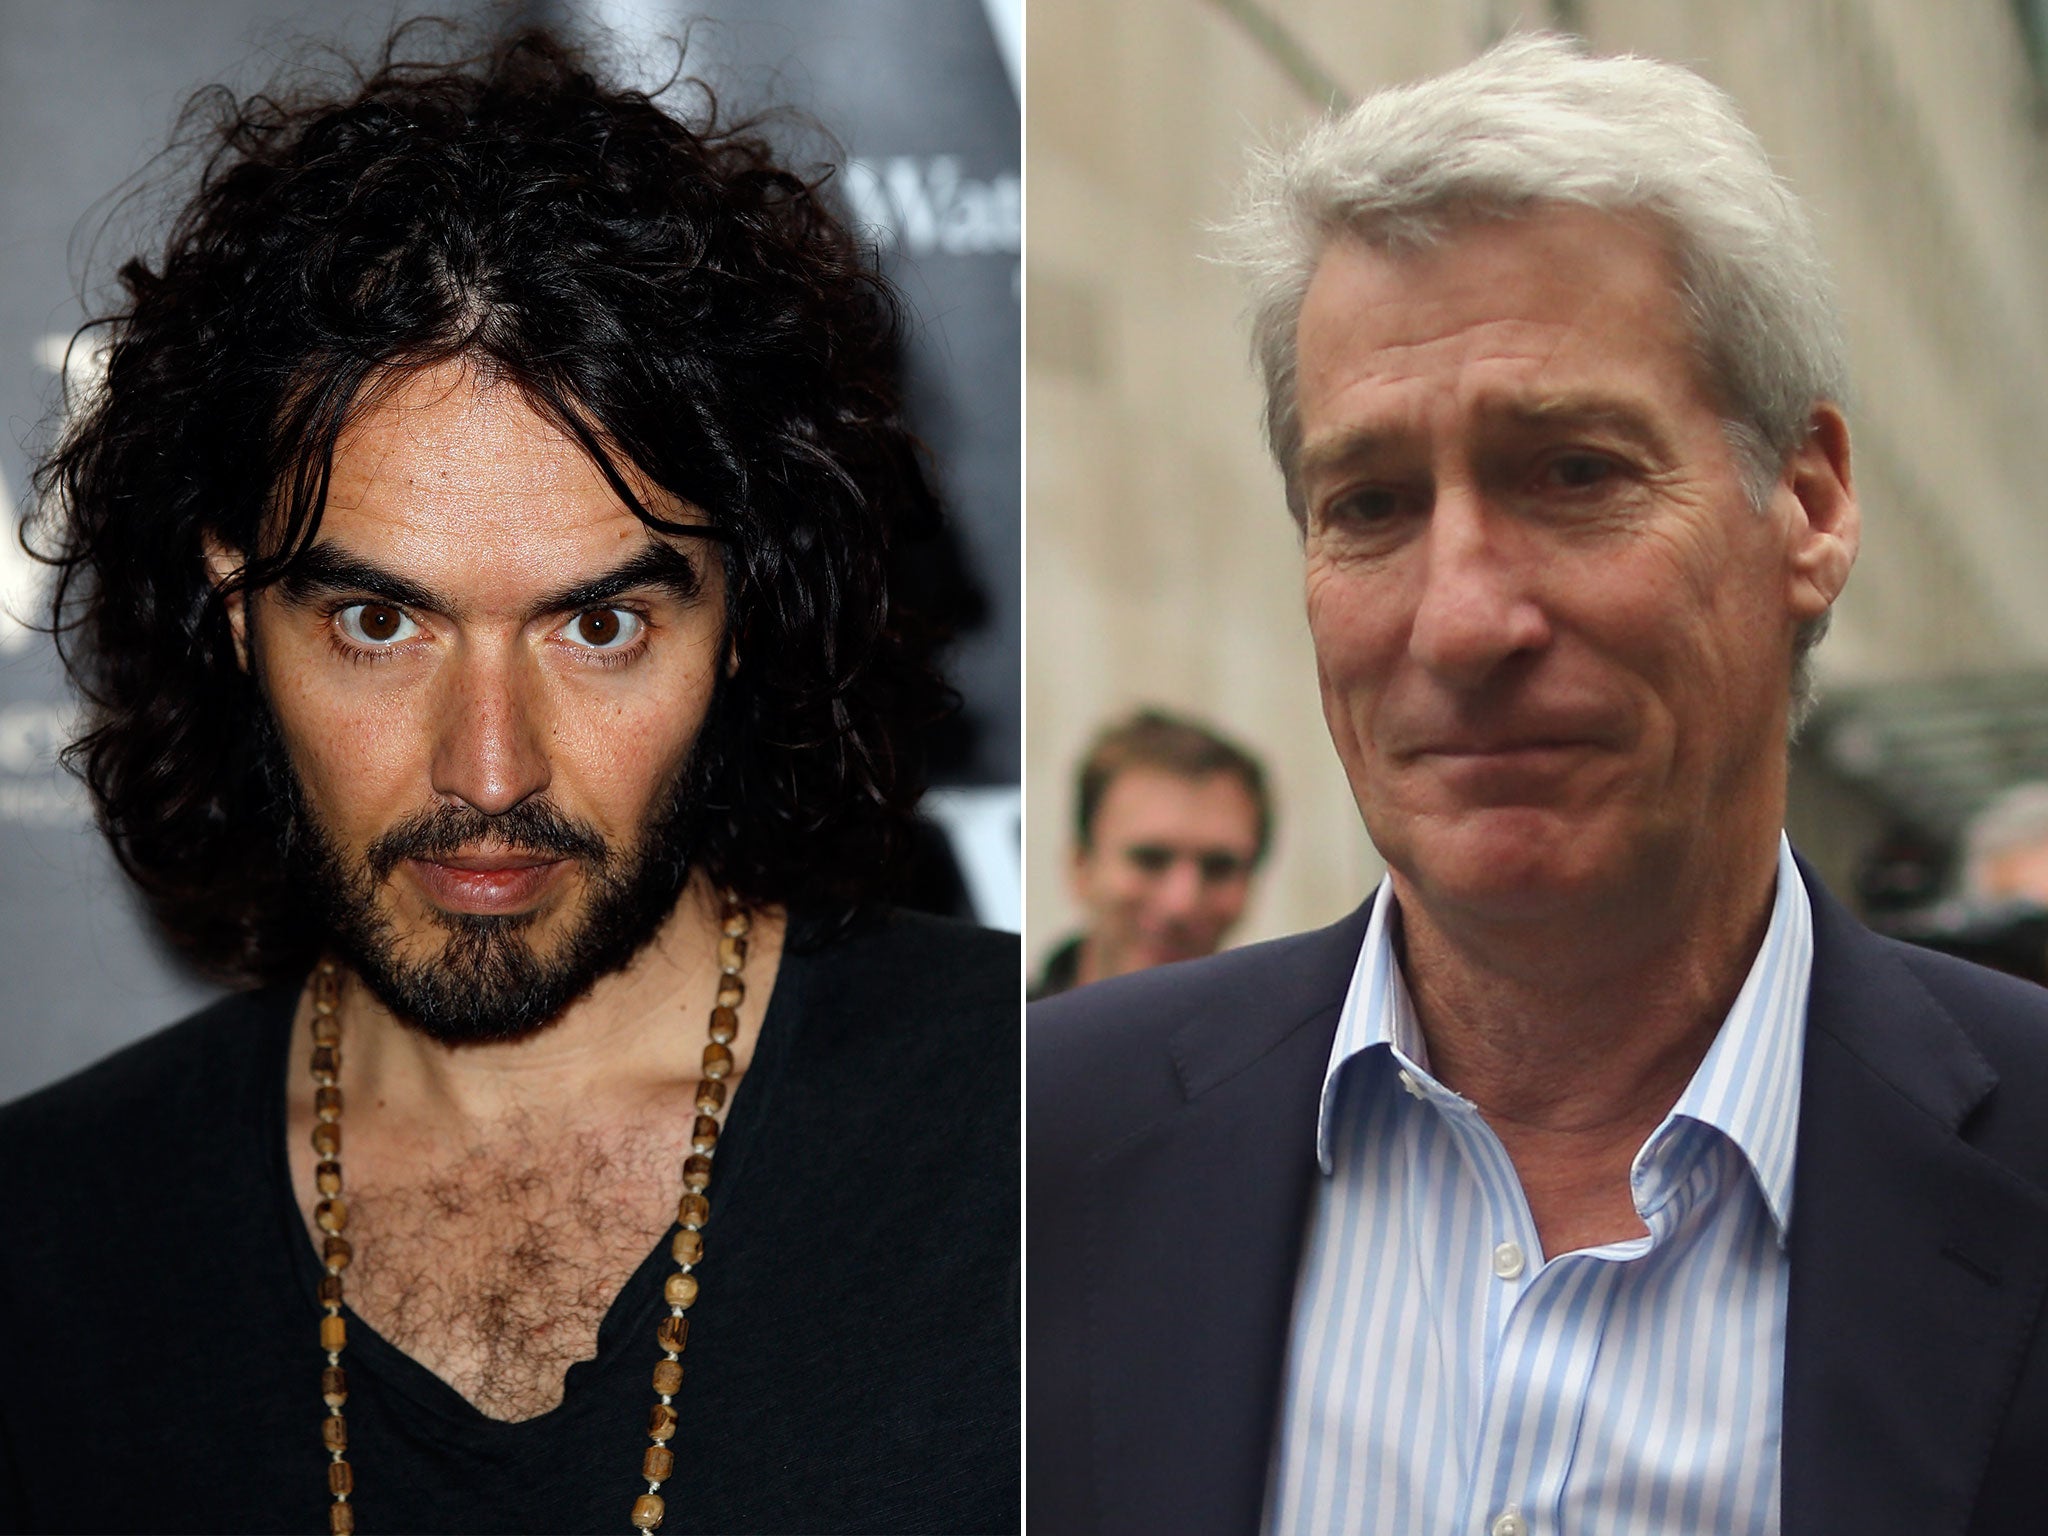 Russell Brand and Jeremy Paxman have very different views on voting in elections